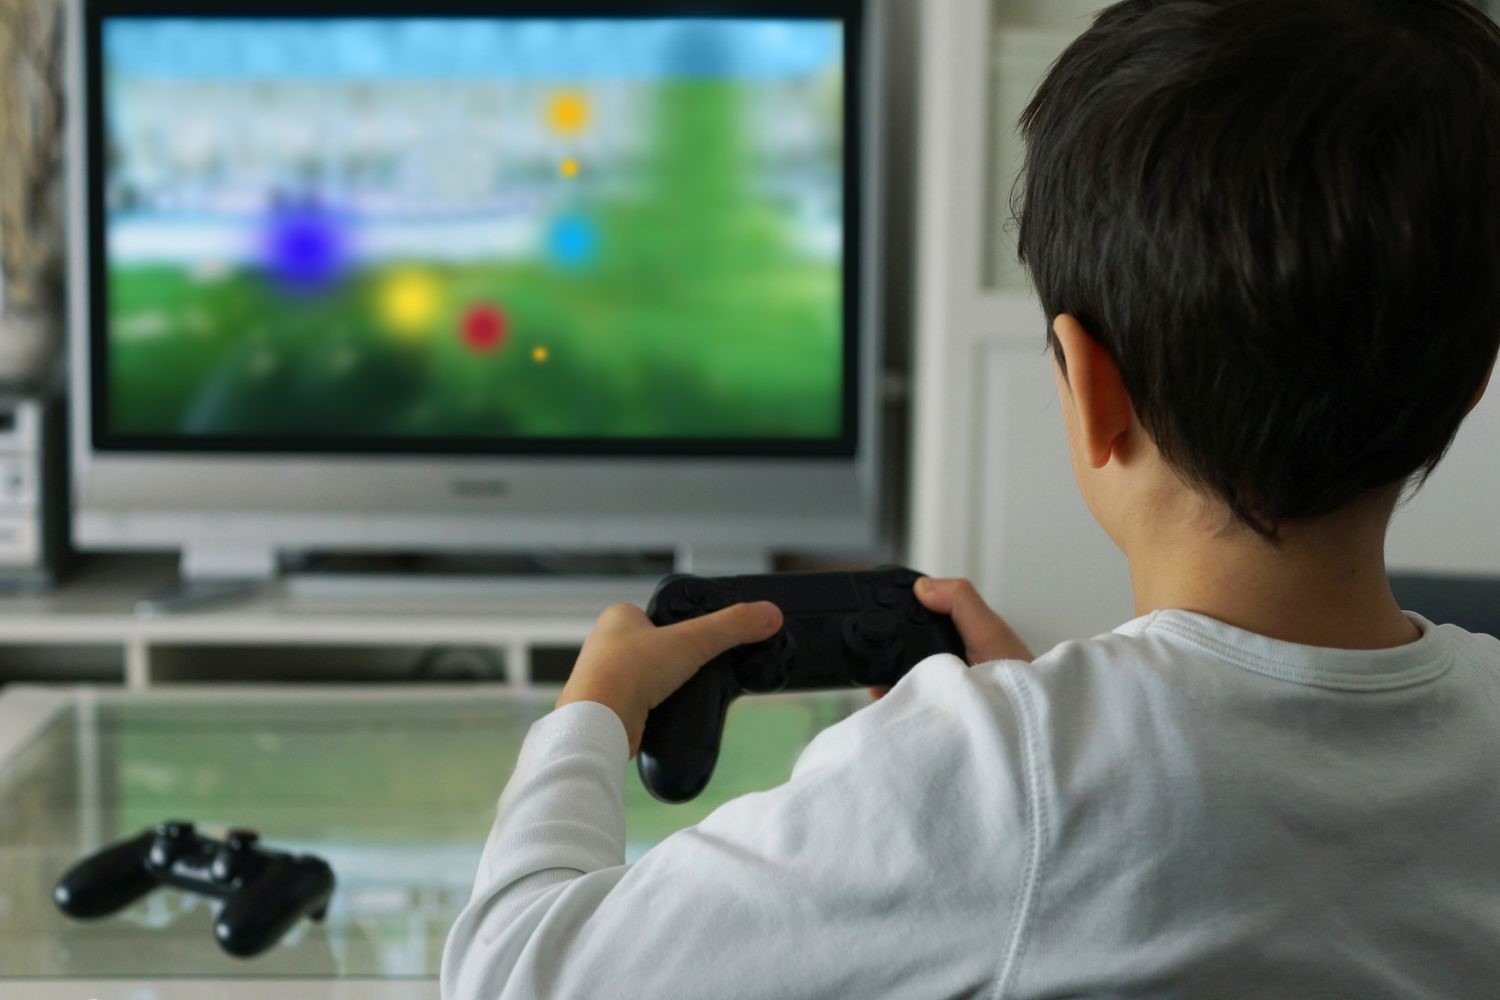 3 Tips to Safely Make Money Selling Video Game Items Online